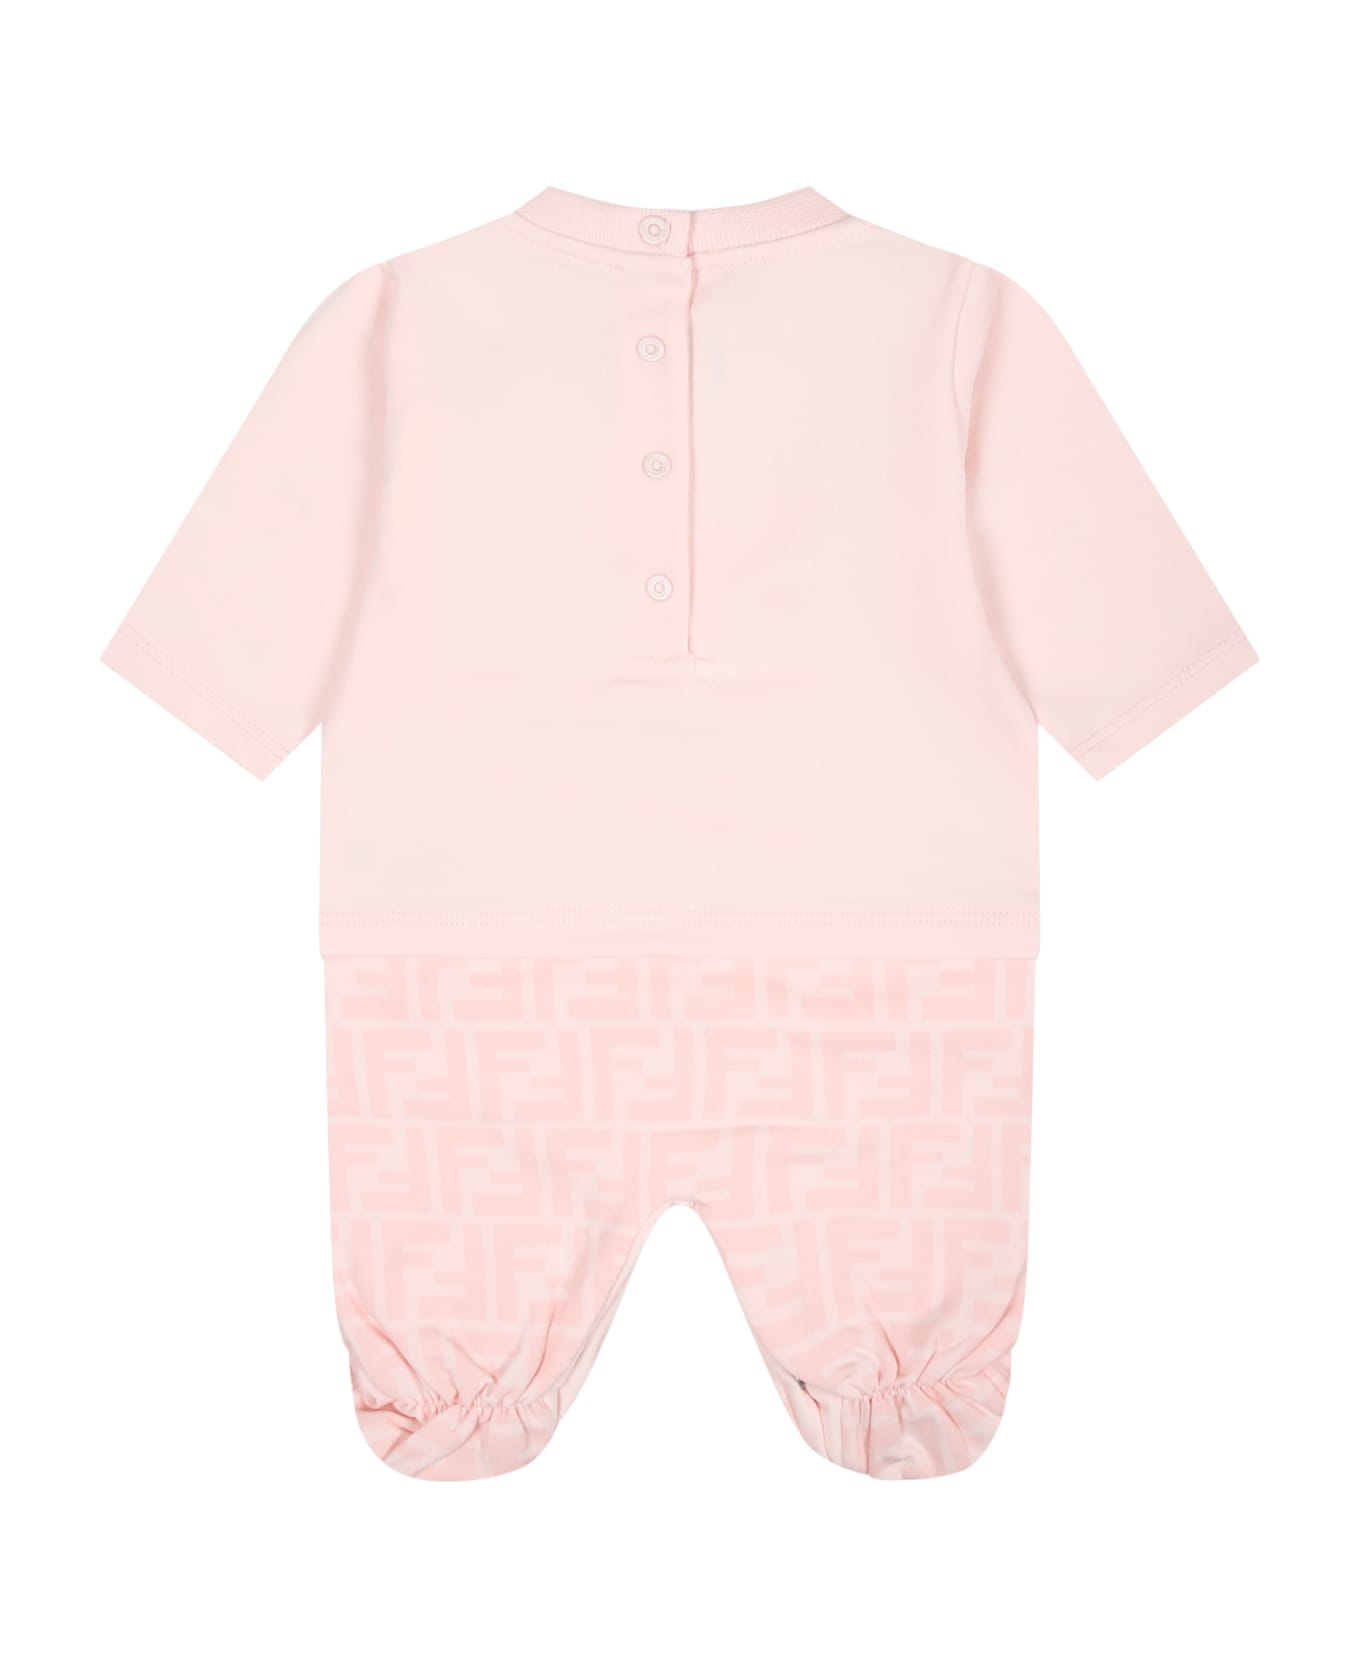 Fendi Pink Set For Baby Girl With Logo - Pink